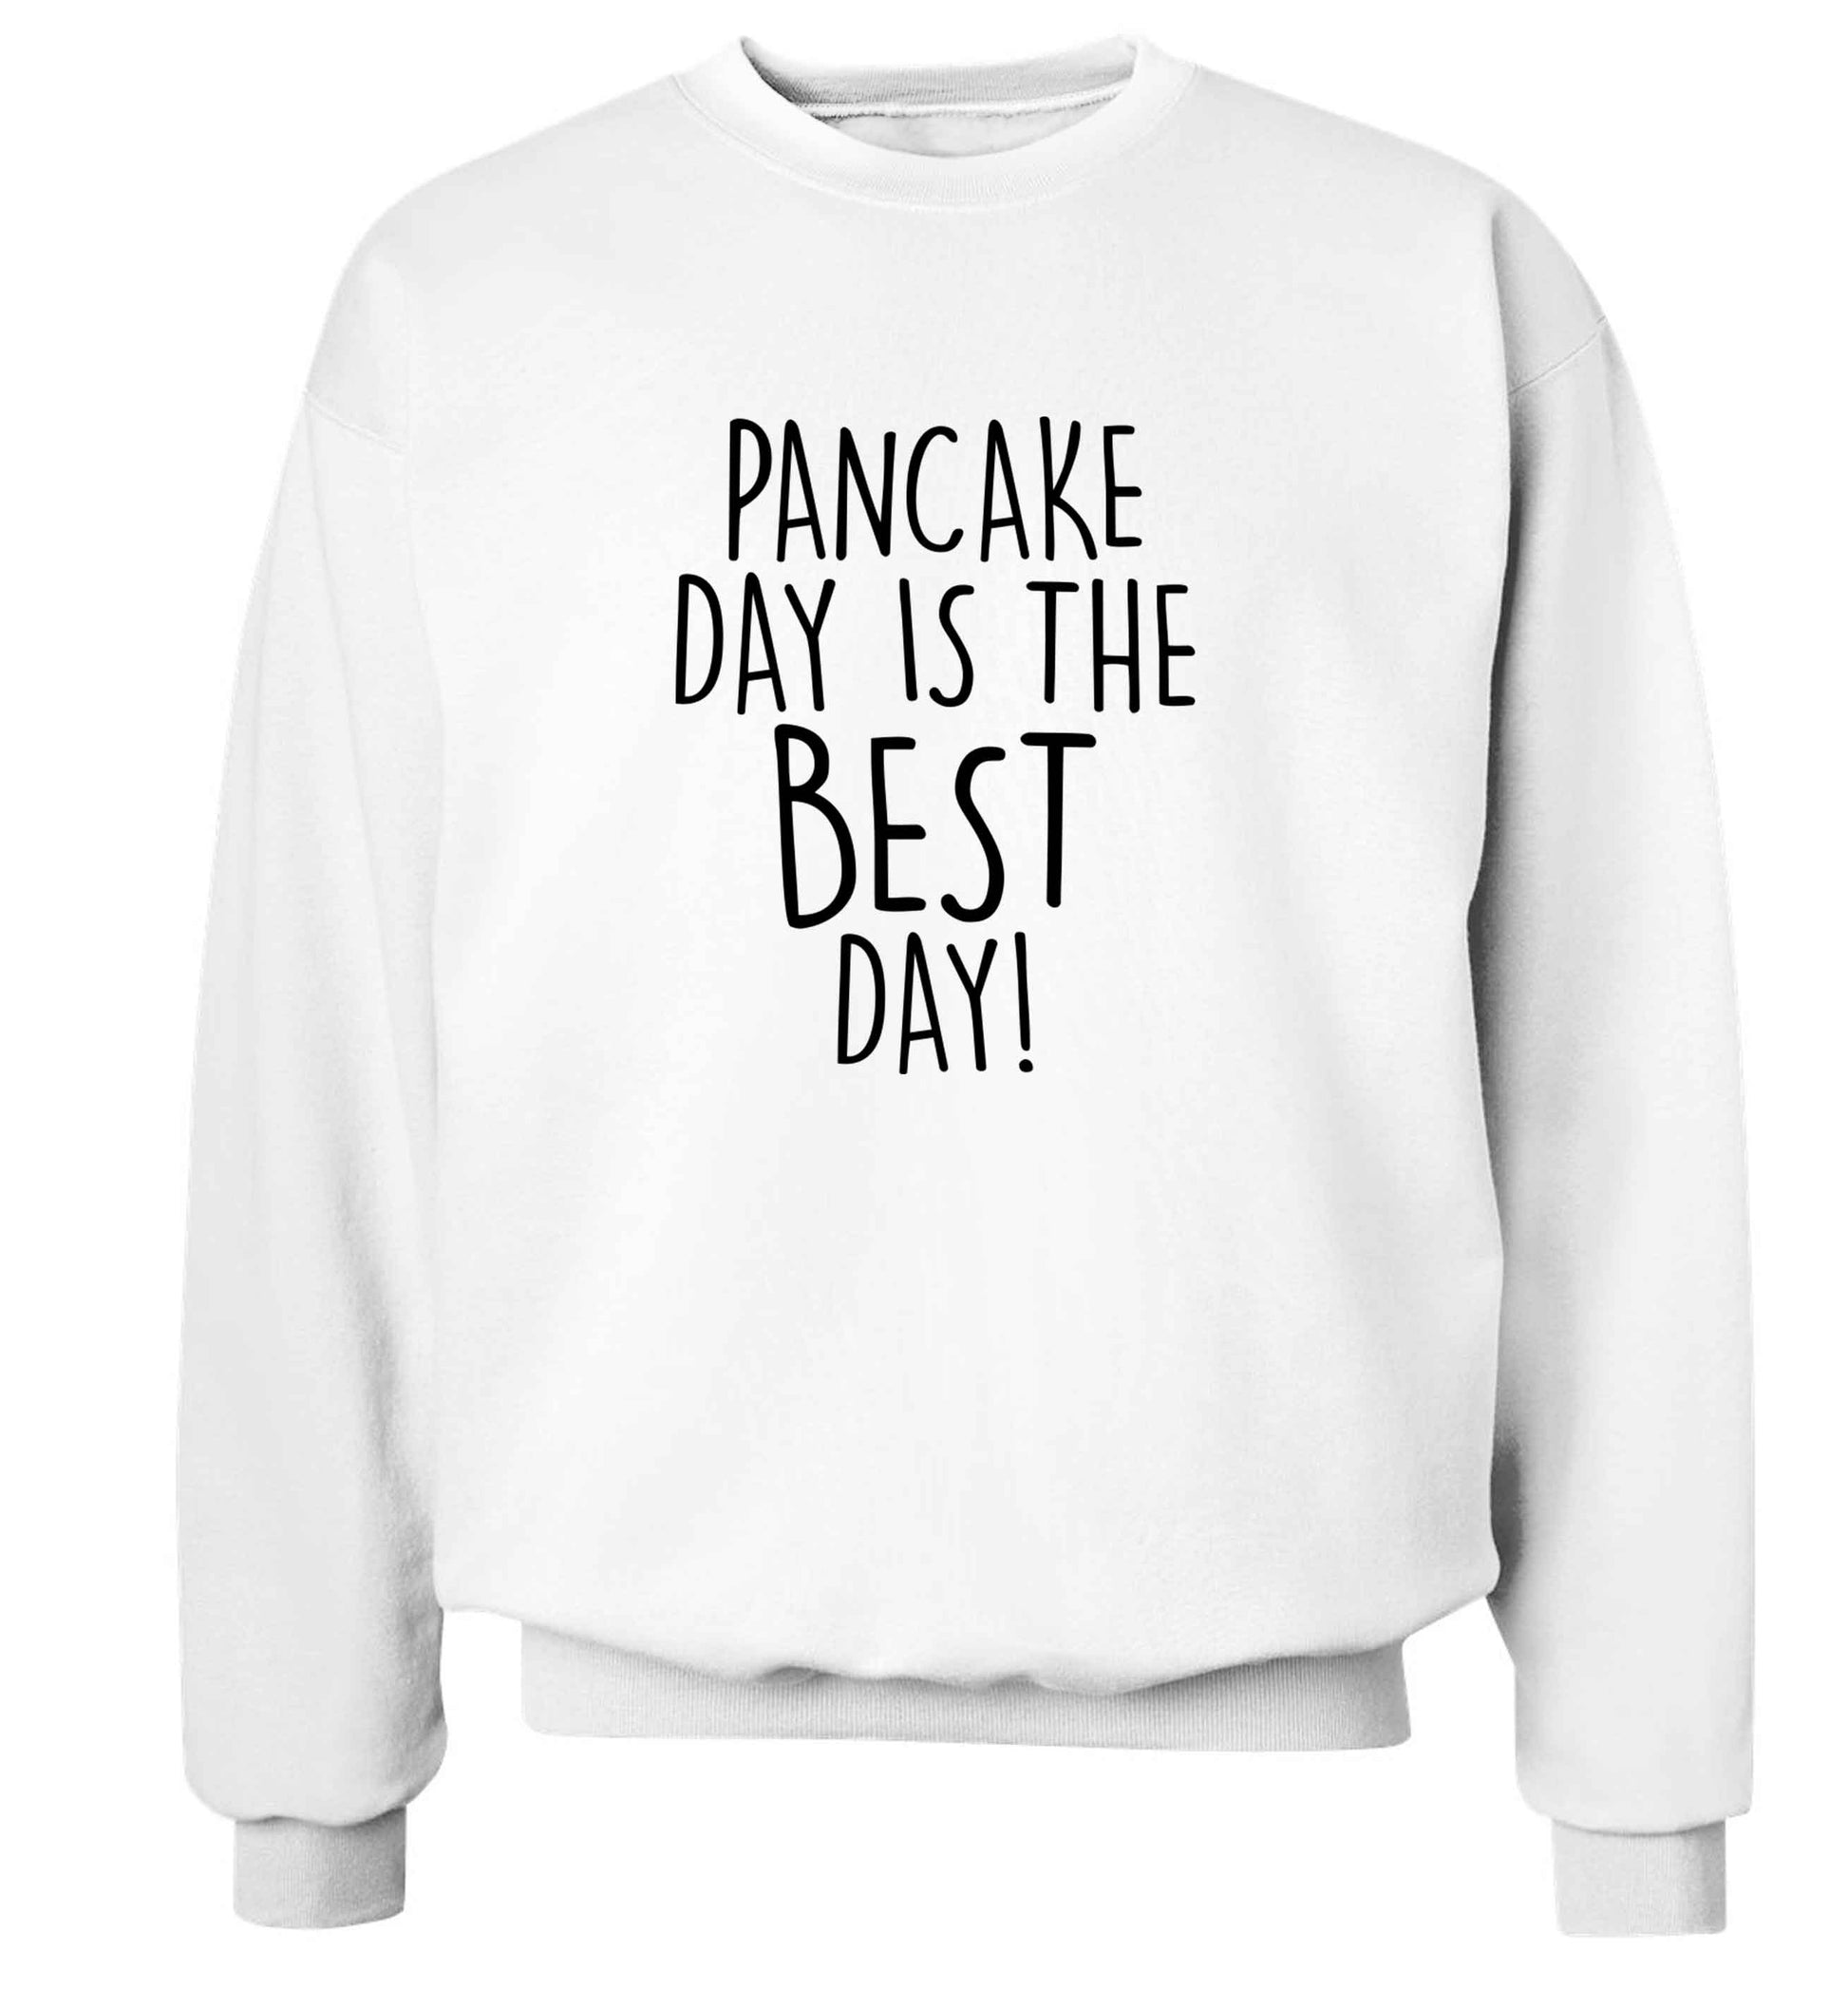 Pancake day is the best day adult's unisex white sweater 2XL